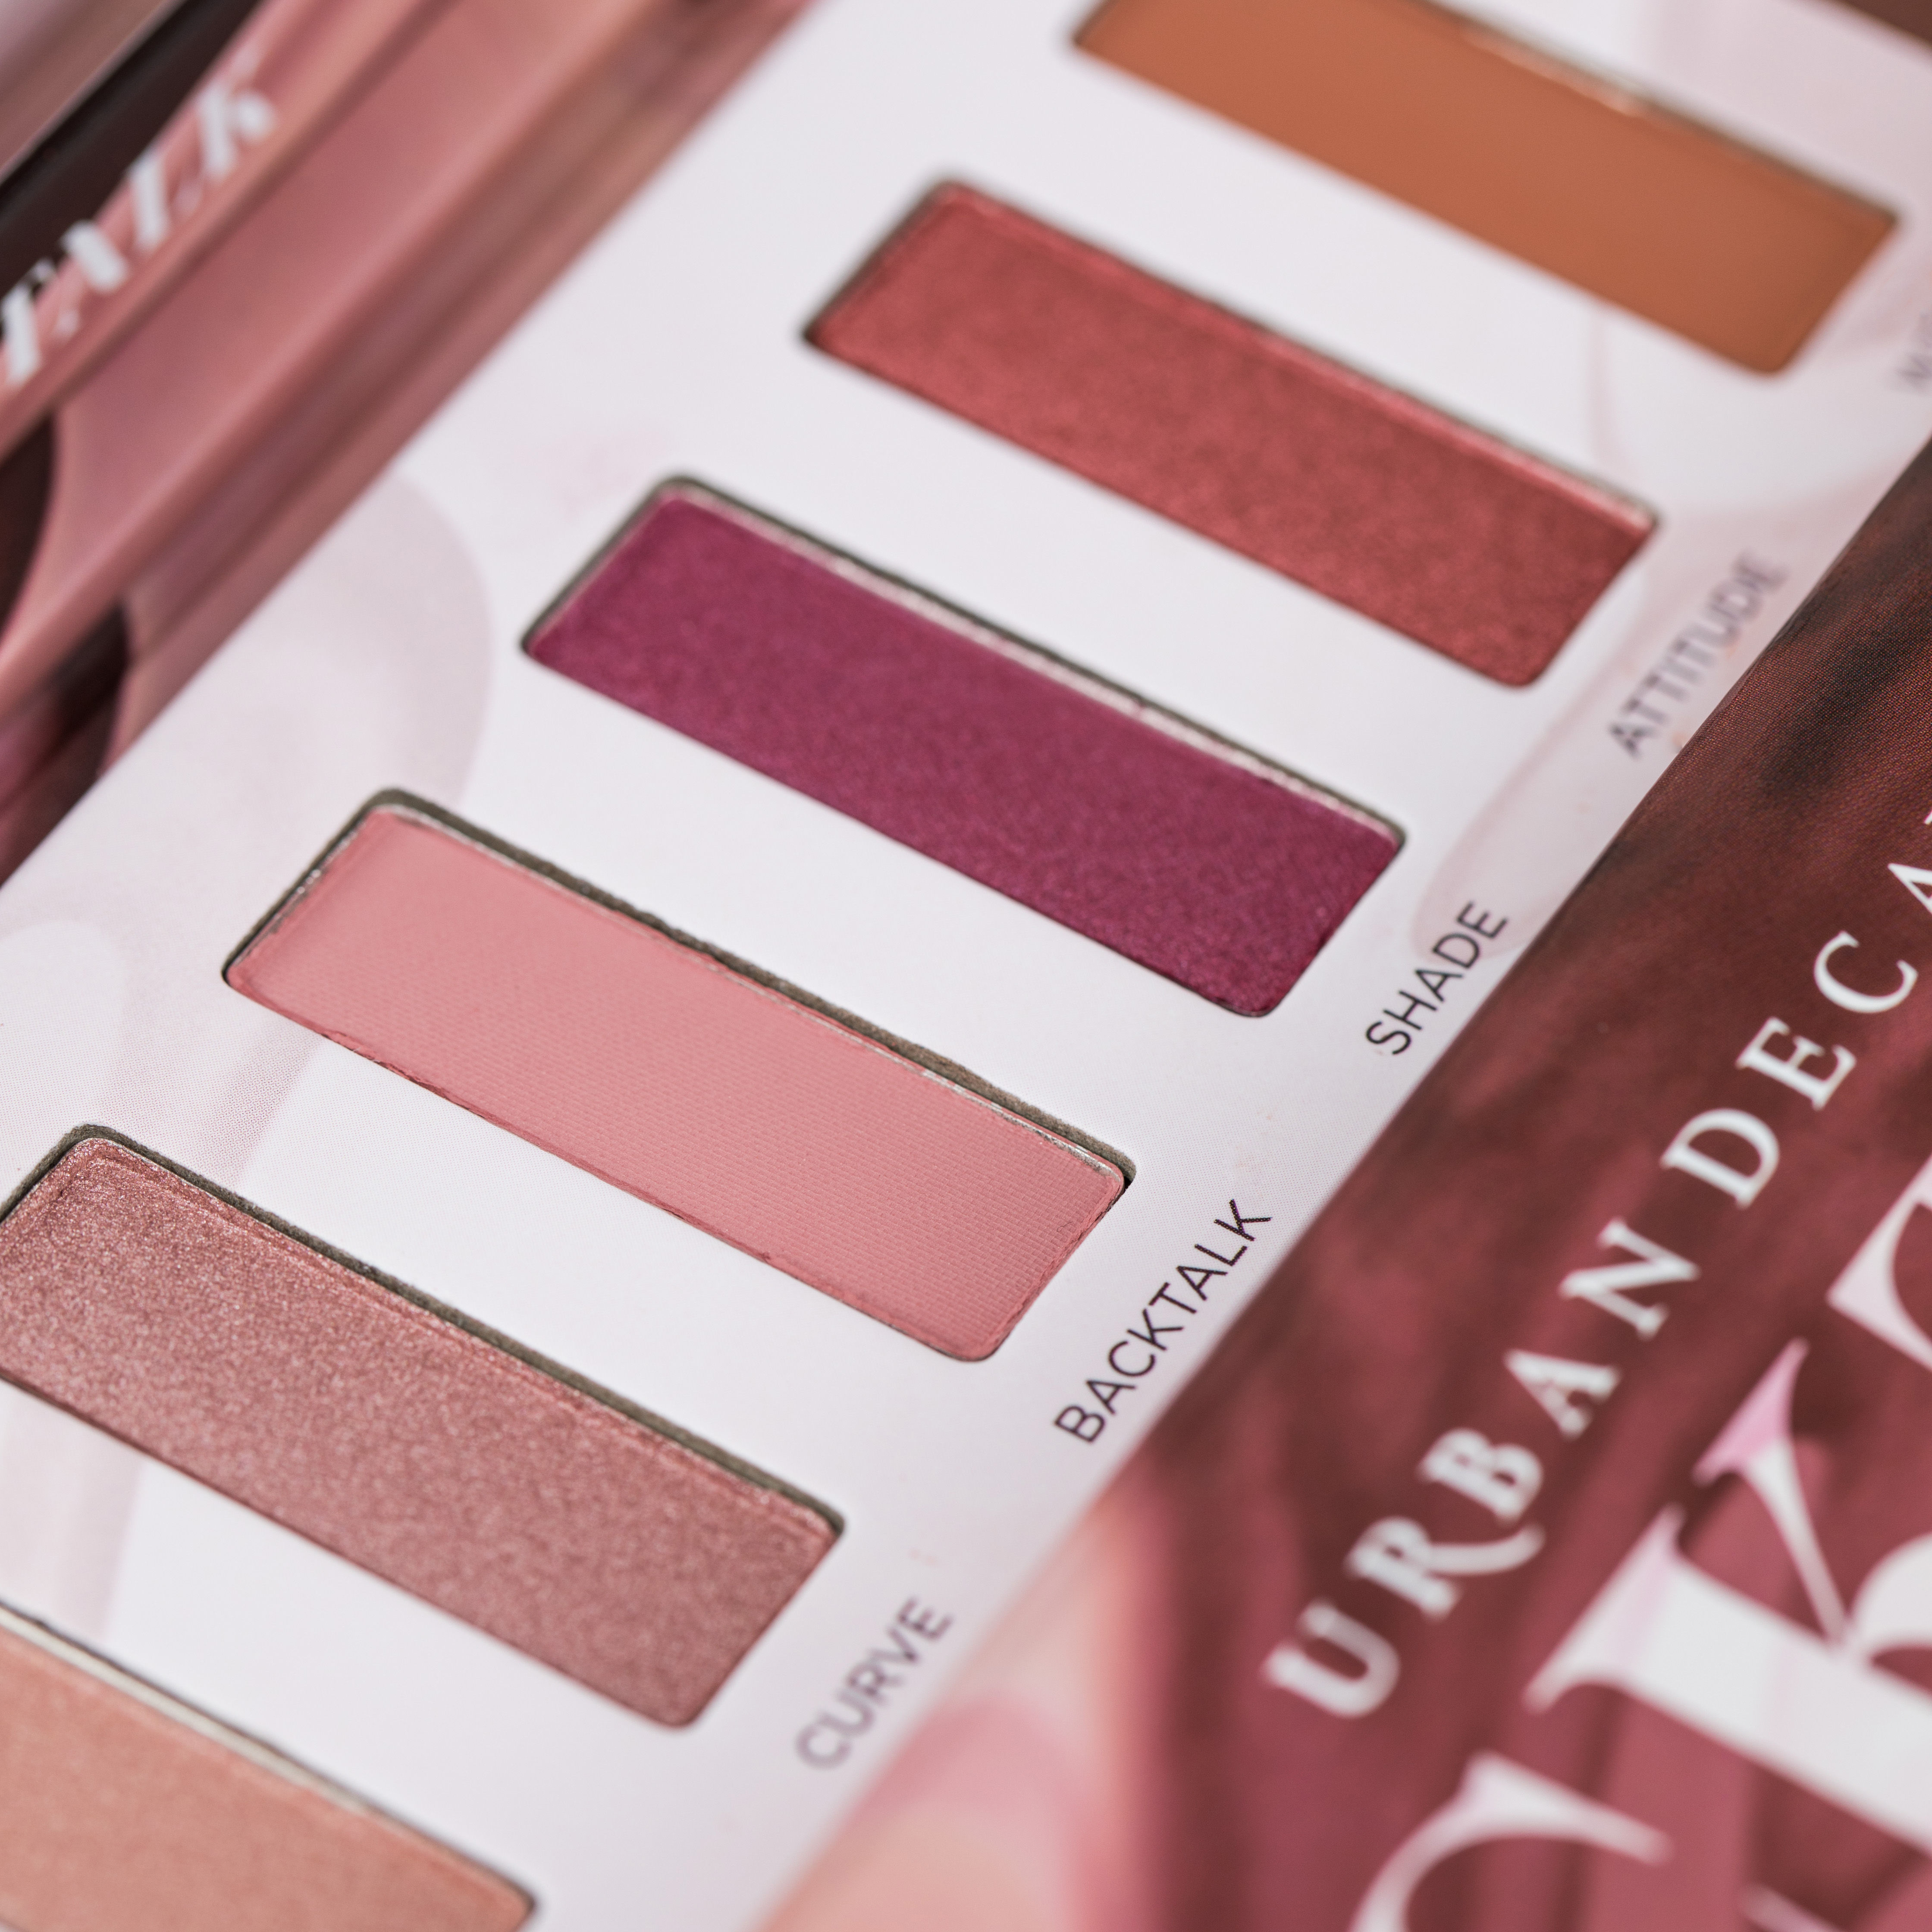 The new Urban Decay Backtalk palette proves that rose pink can be pretty bold